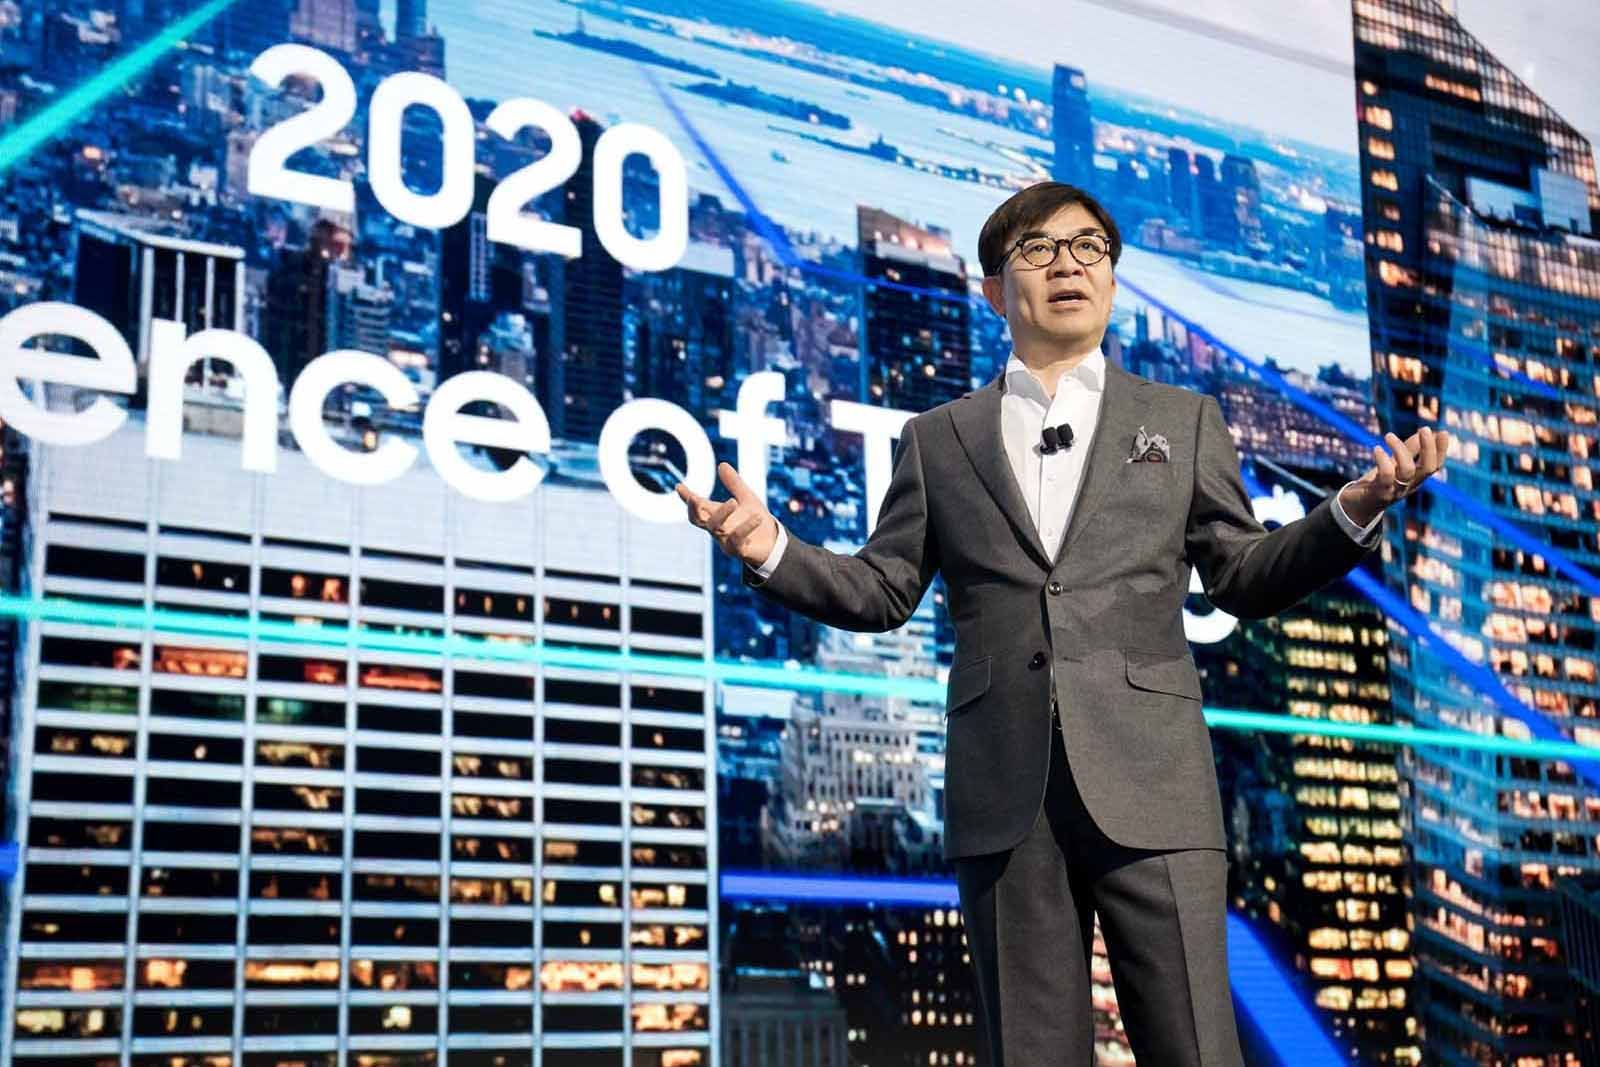 Samsung All our devices will be connected and intelligent by 2020 image 1